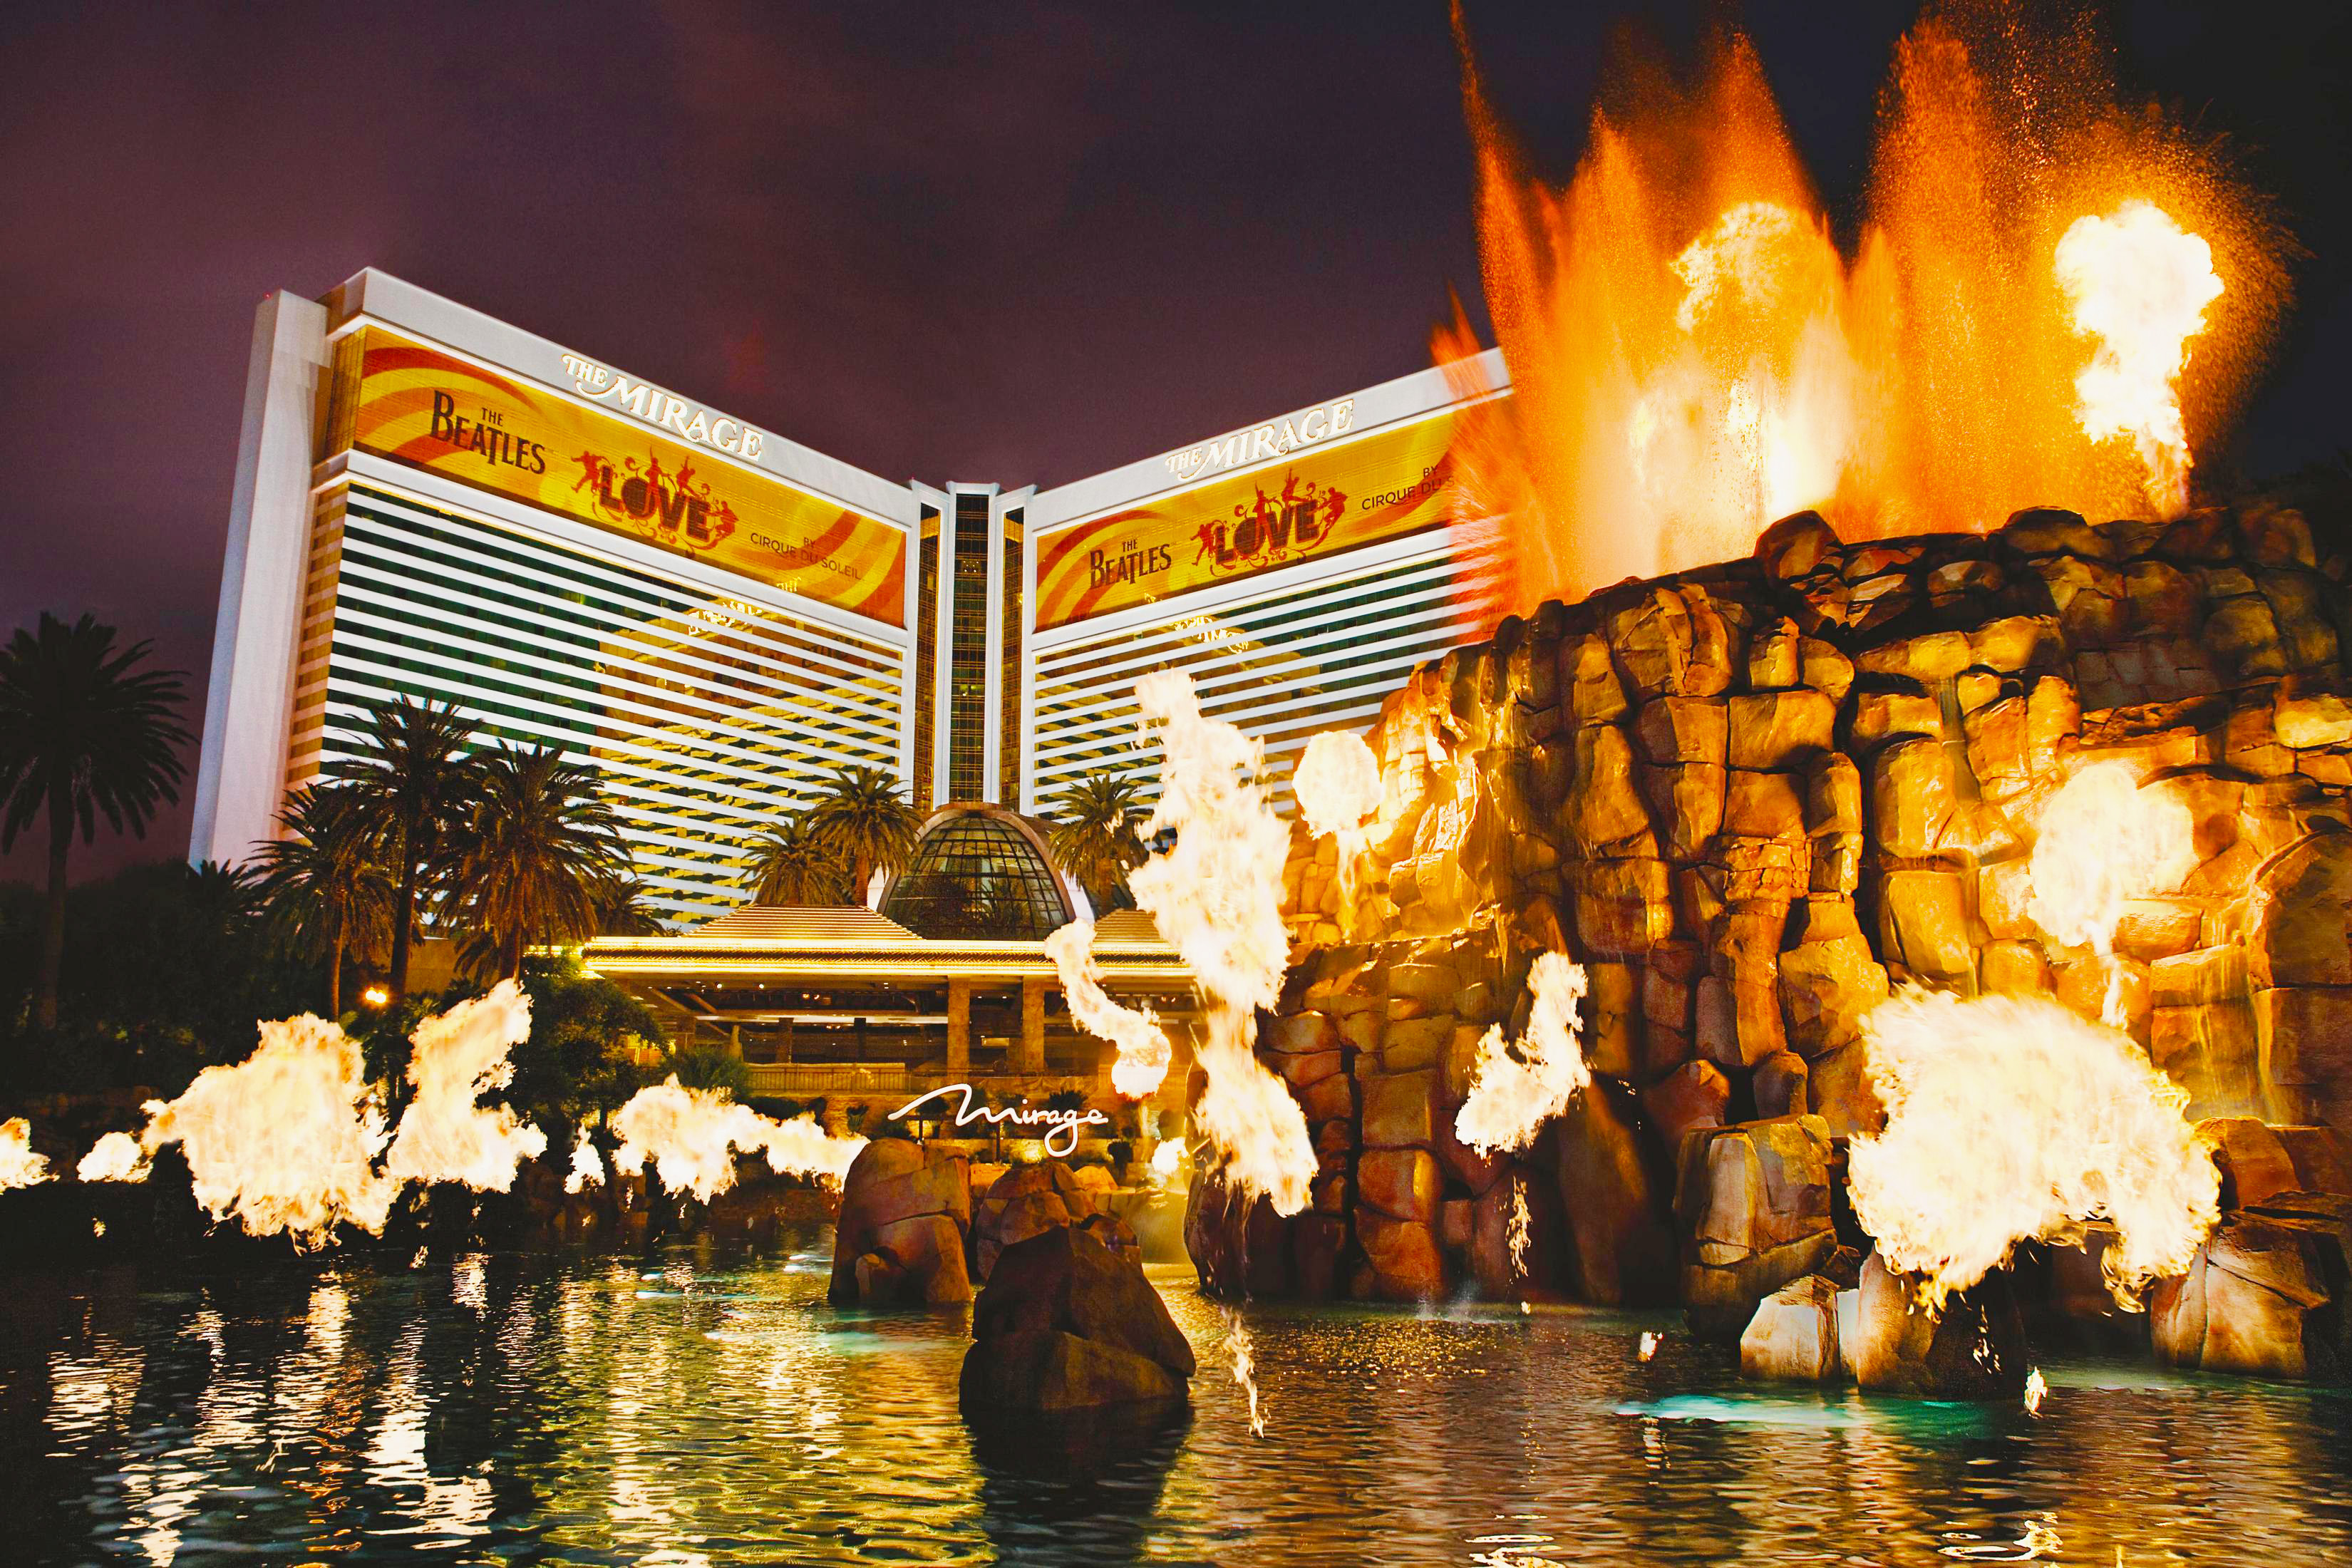 Top 10 Free Things To Do In Las Vegas NV / RE/MAX List For 1%